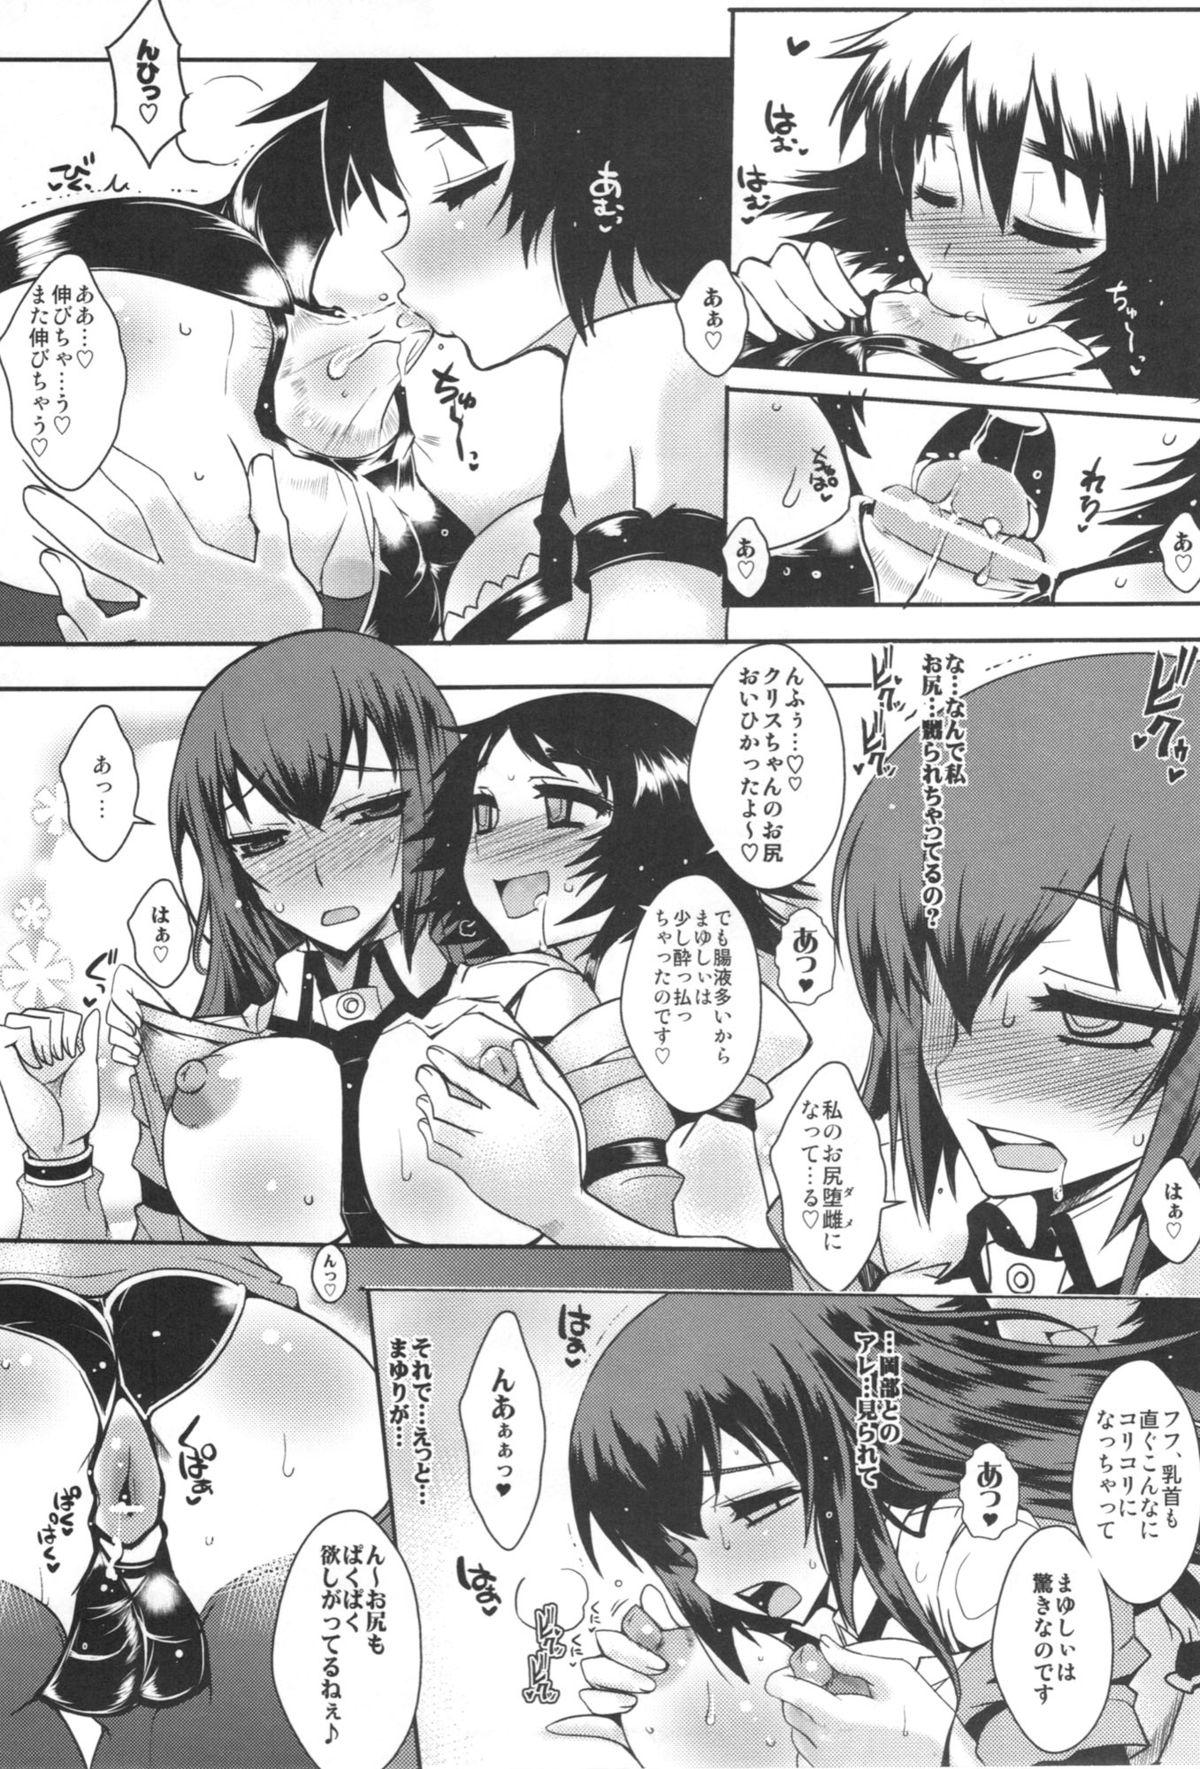 Free Shirikan Aikou no Sodominists - Steinsgate Public Nudity - Page 5